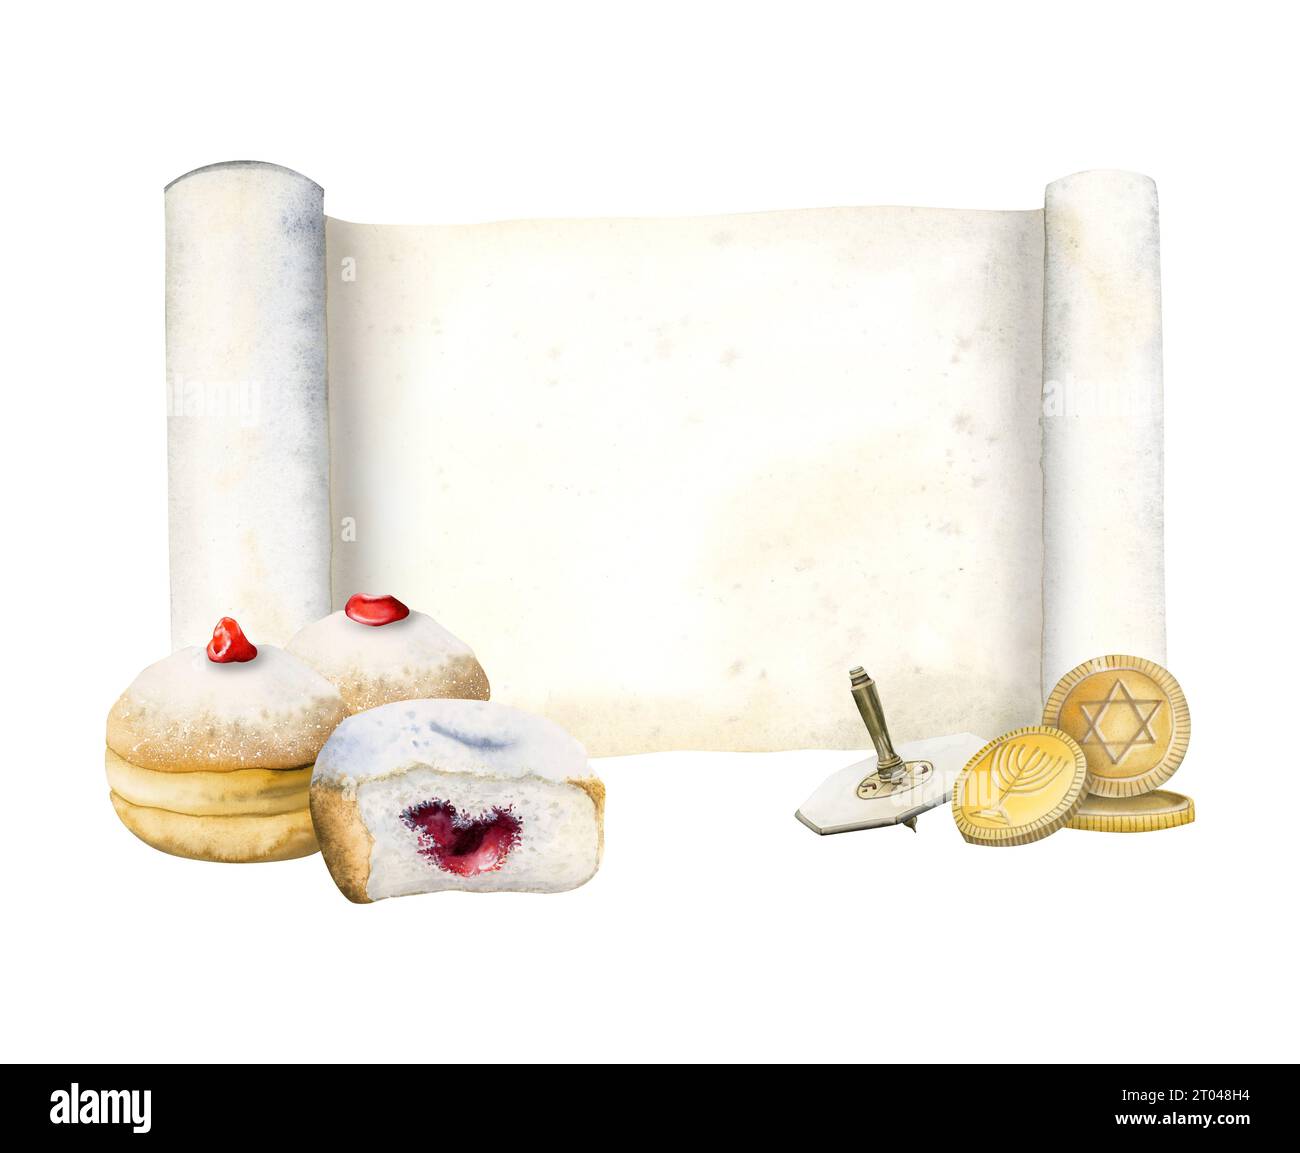 Hanukkah greeting card template with Torah scroll, traditional donuts, dreidel and coins watercolor illustration Stock Photo